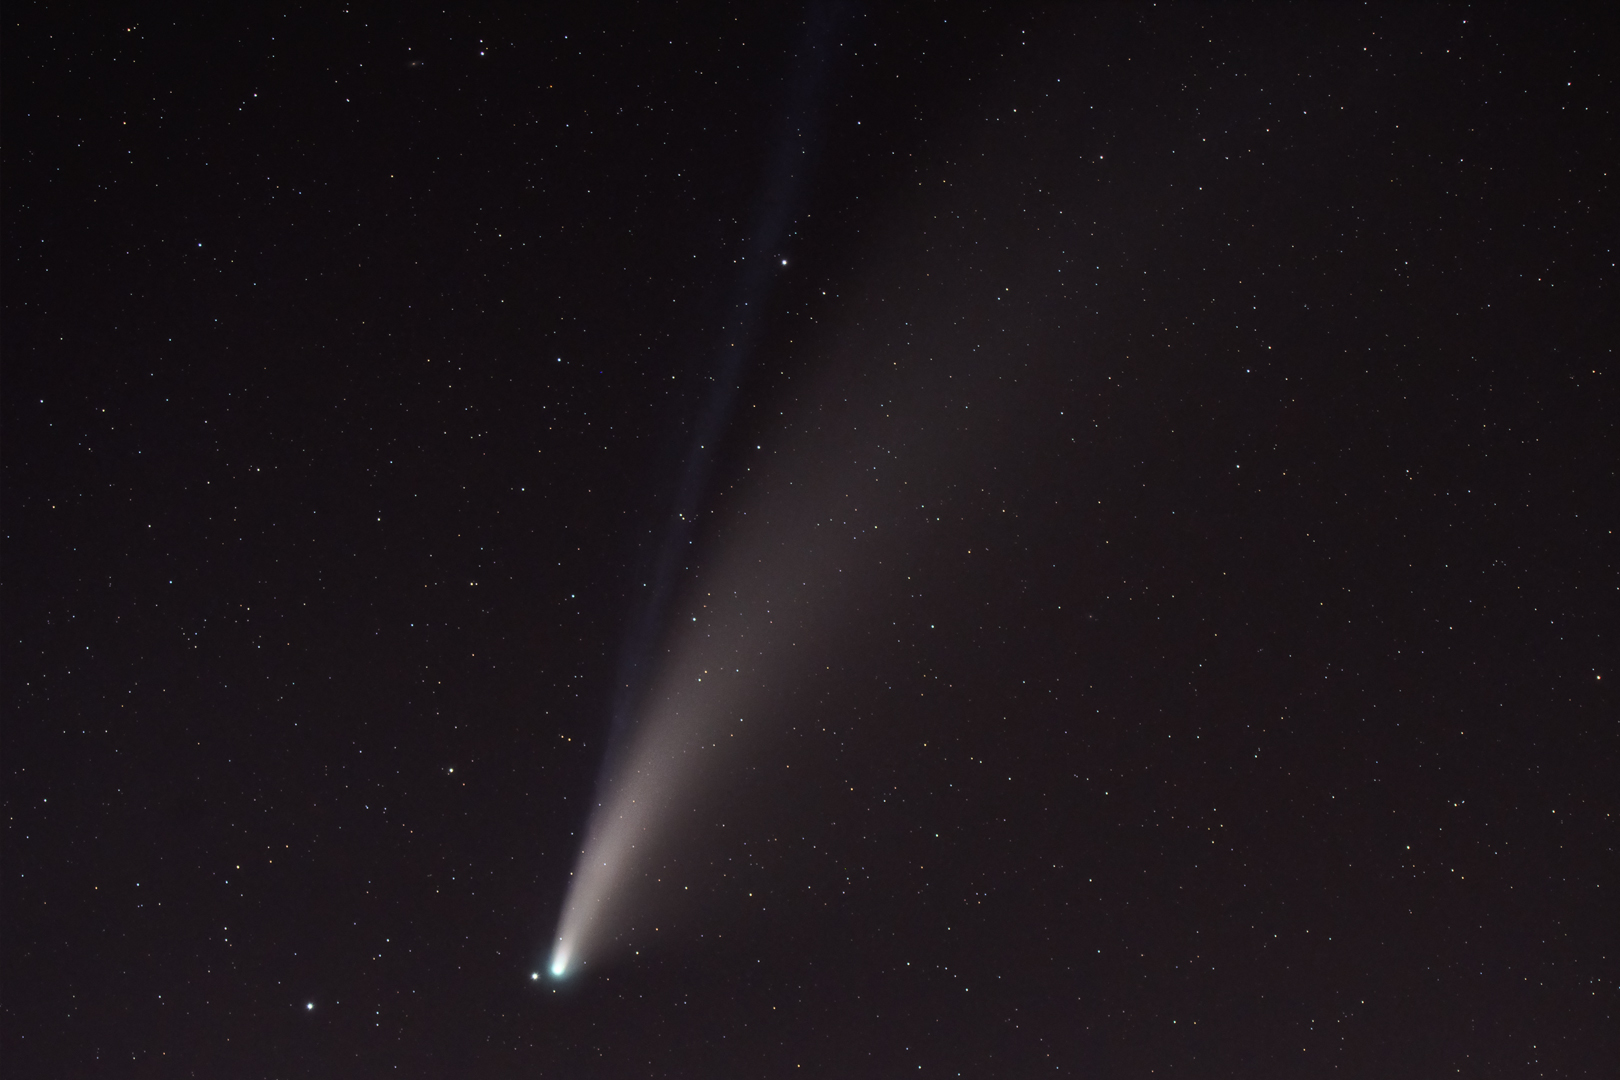 Comet C2020 F3 Neowise...